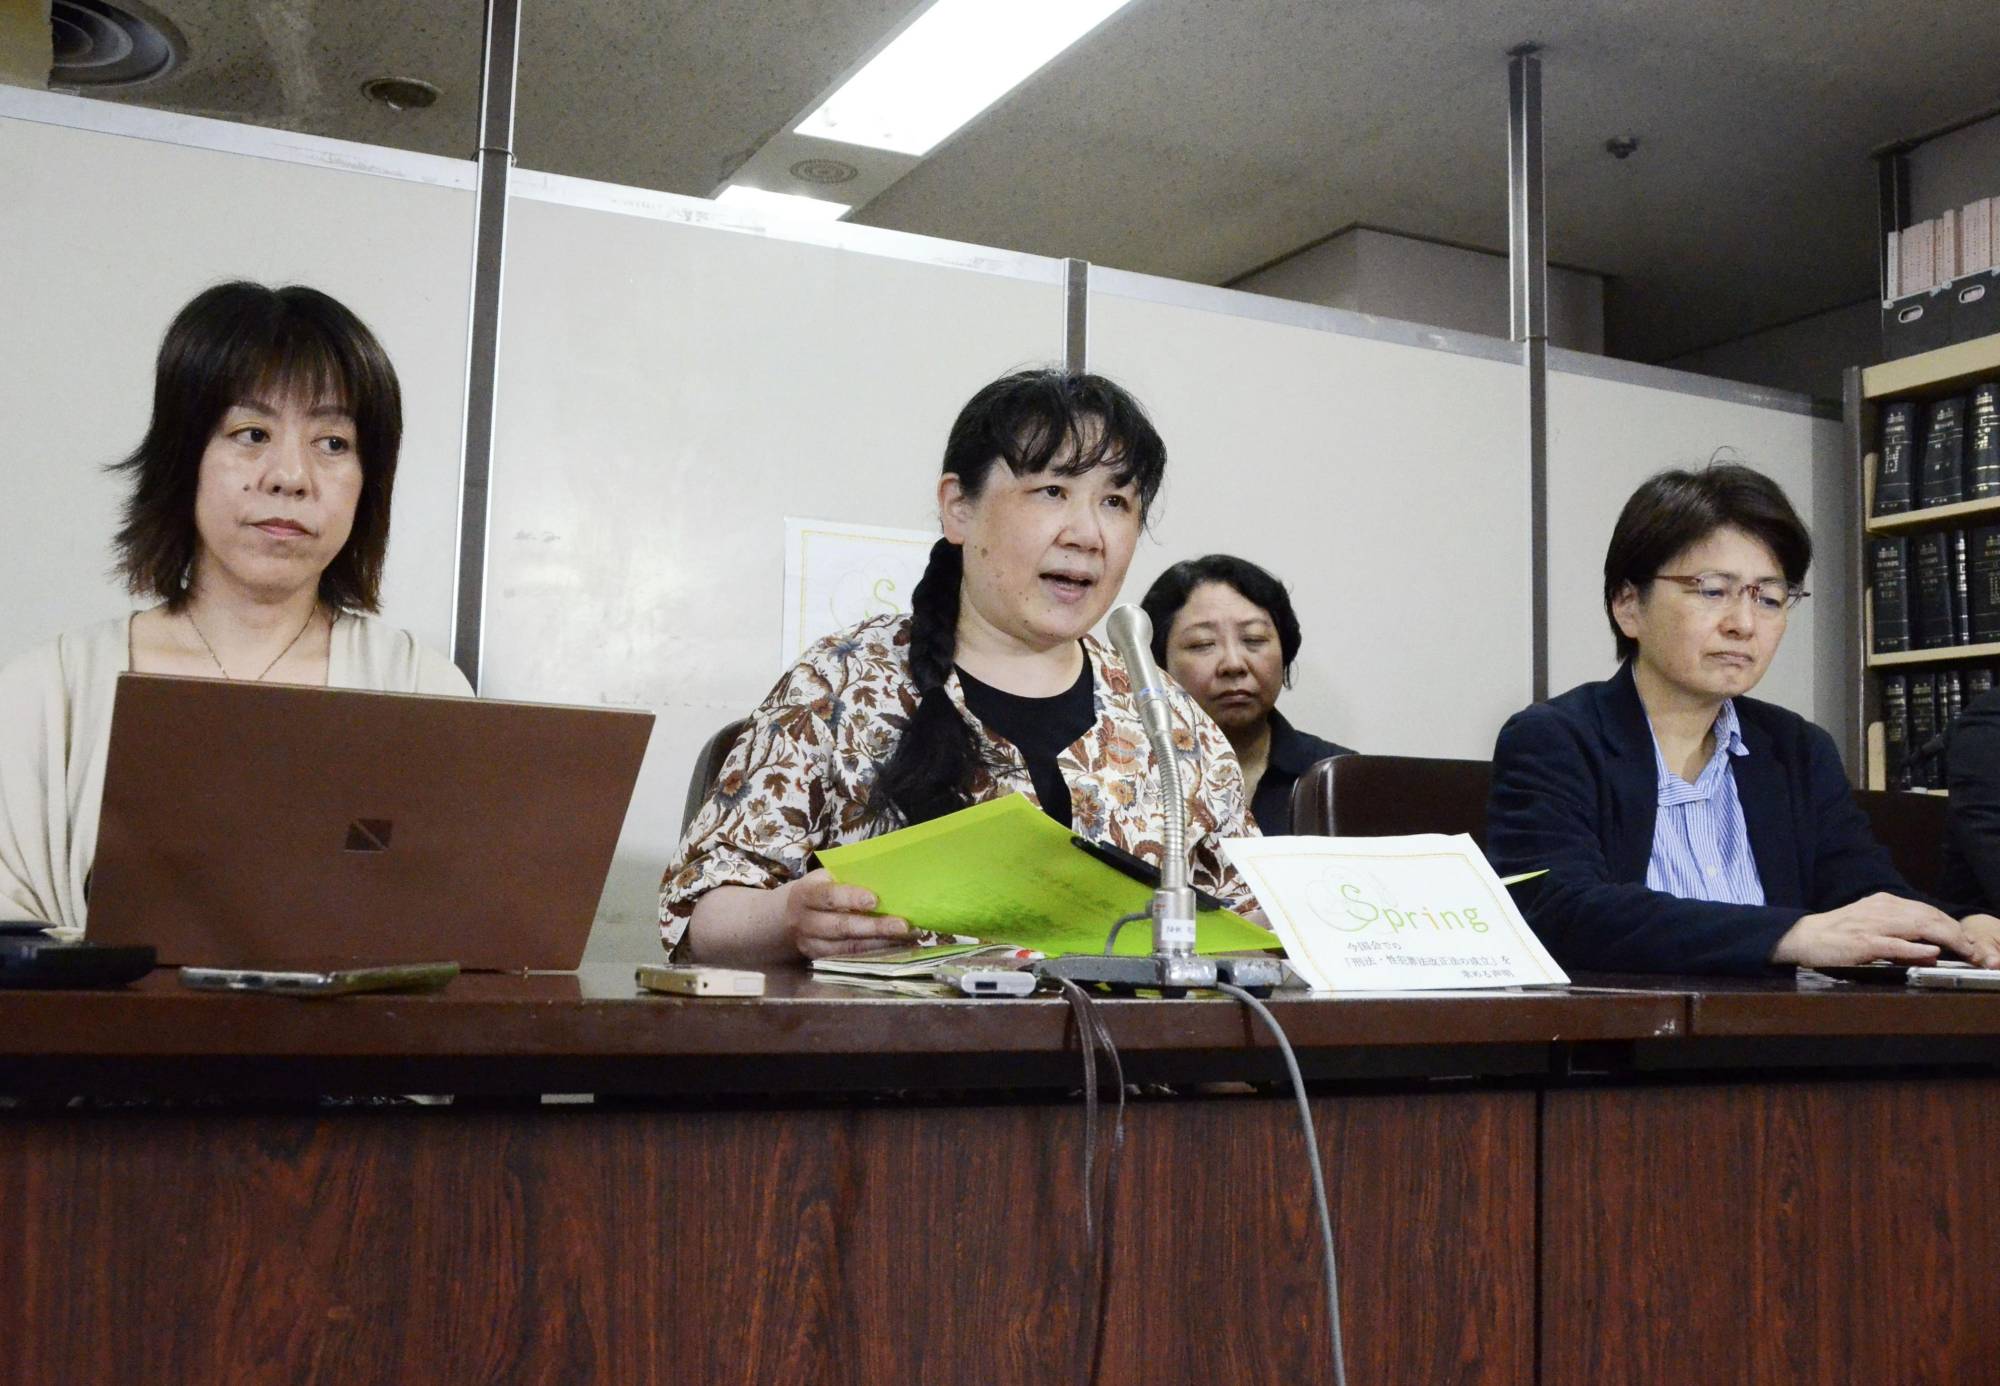 Member of the nonprofit organization Spring, which campaigns for revisions to sex crime laws, speak to reporters in Tokyo on June 2. | KYODO